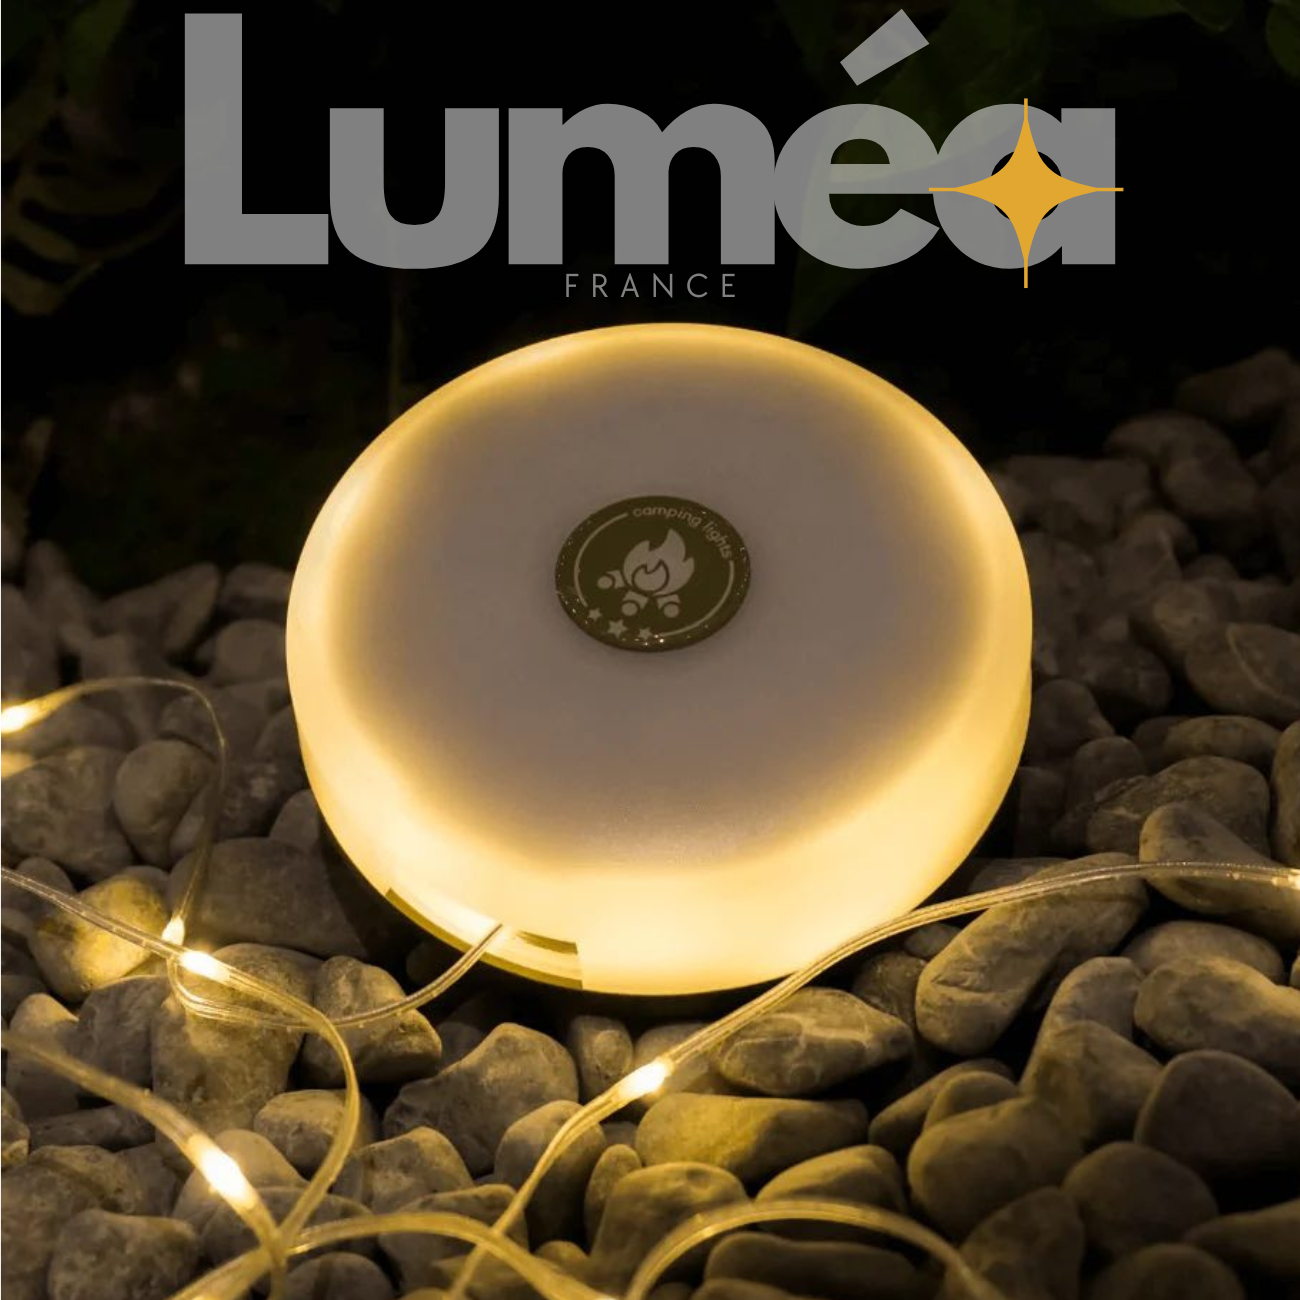 Lumea™ - Camping Multifonctions